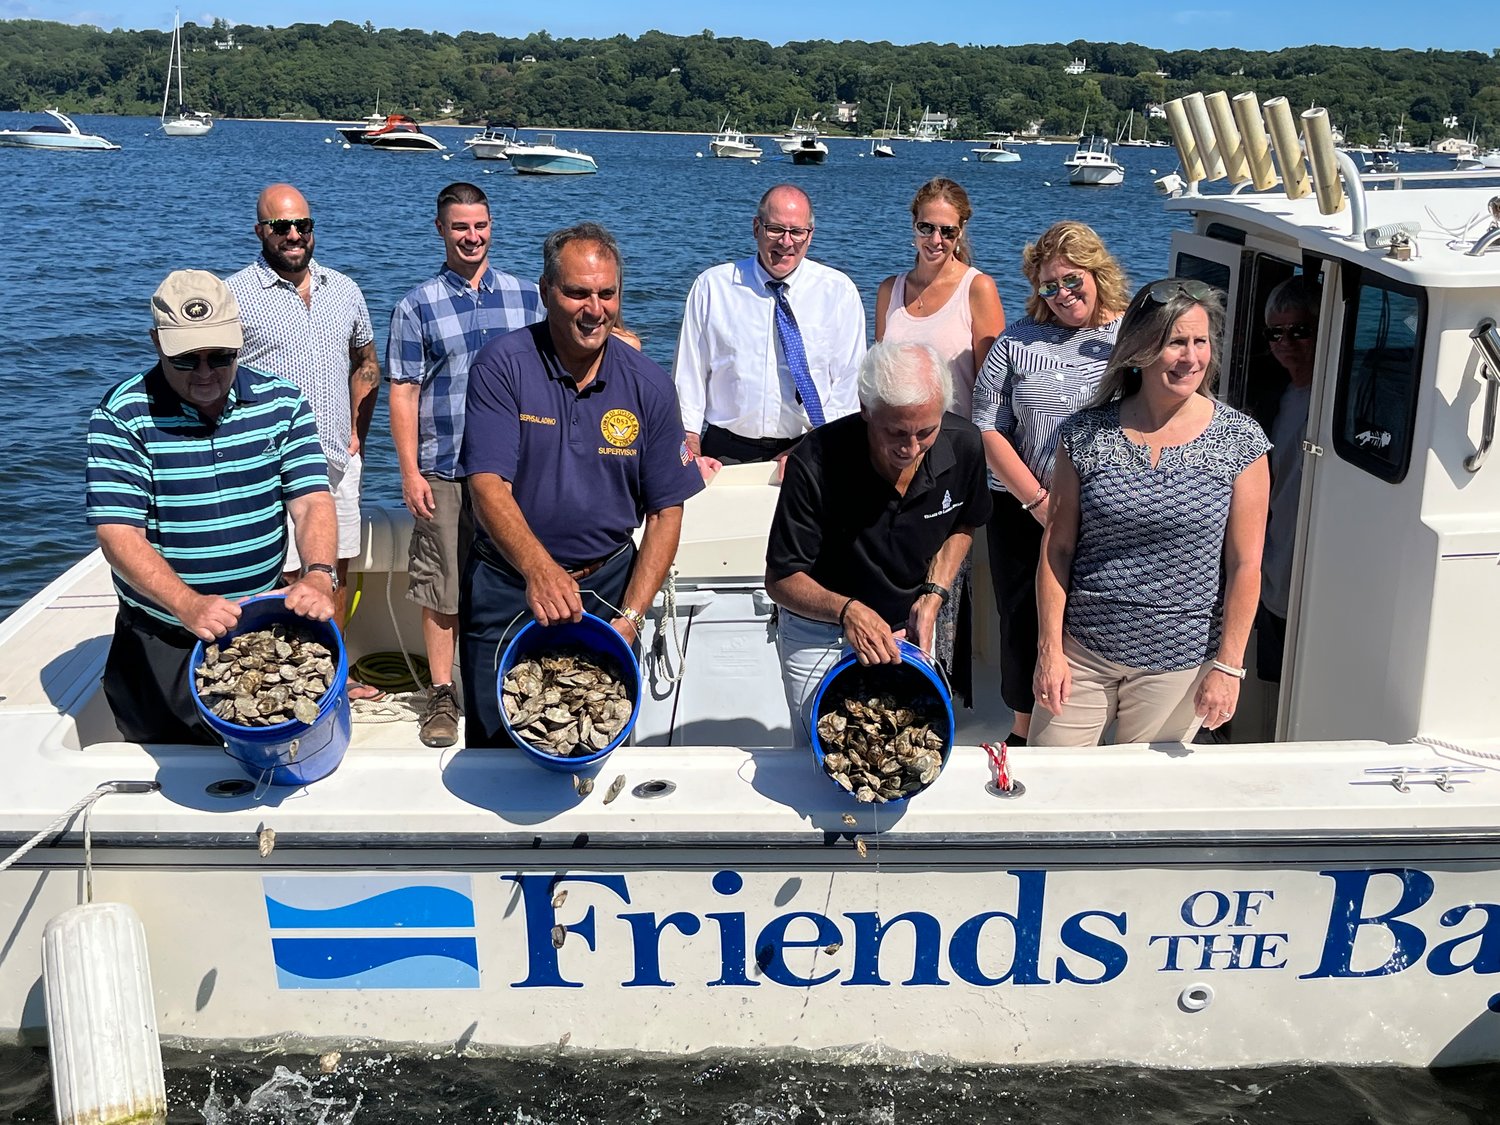 Public officials and oyster gardening program volunteers gathered on the Friends of the Bay’s boat to clean and measure the oysters one final time.